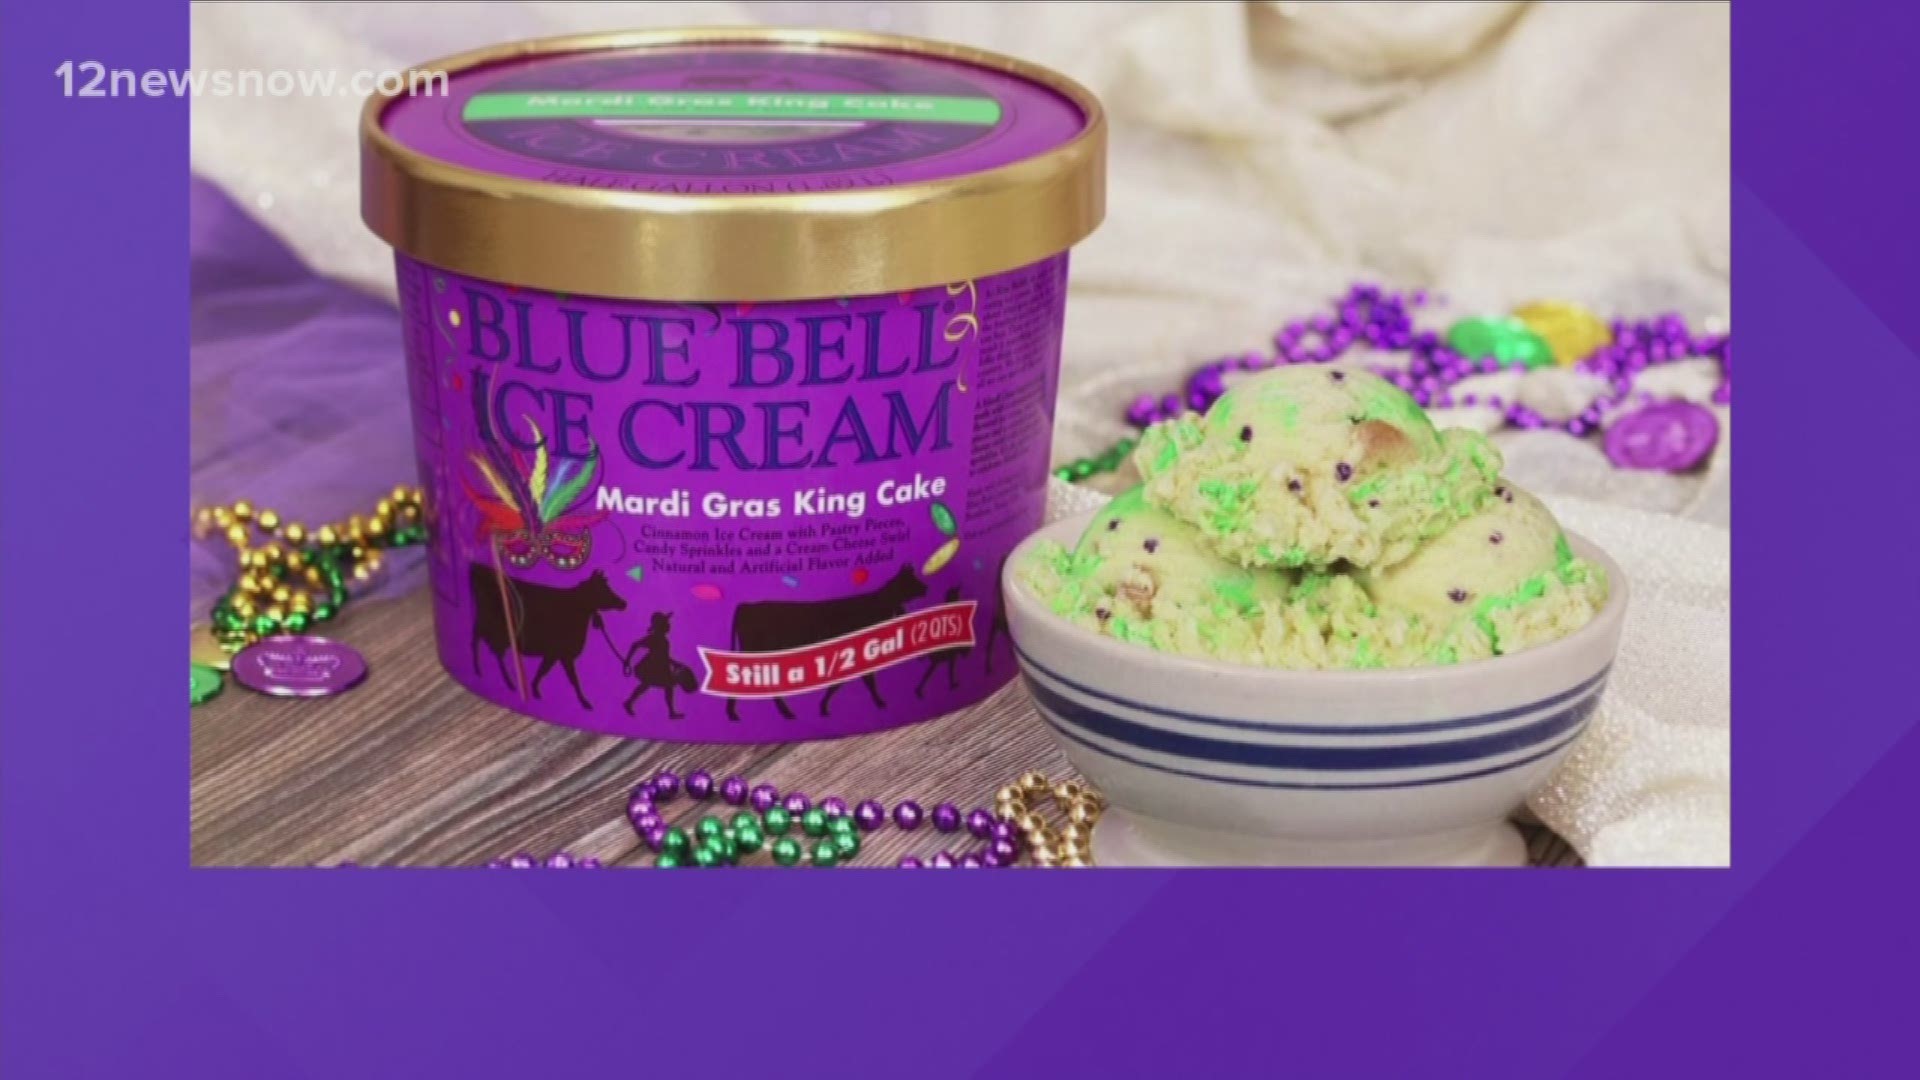 Where can I find Blue Bell Mardi Gras ice cream?